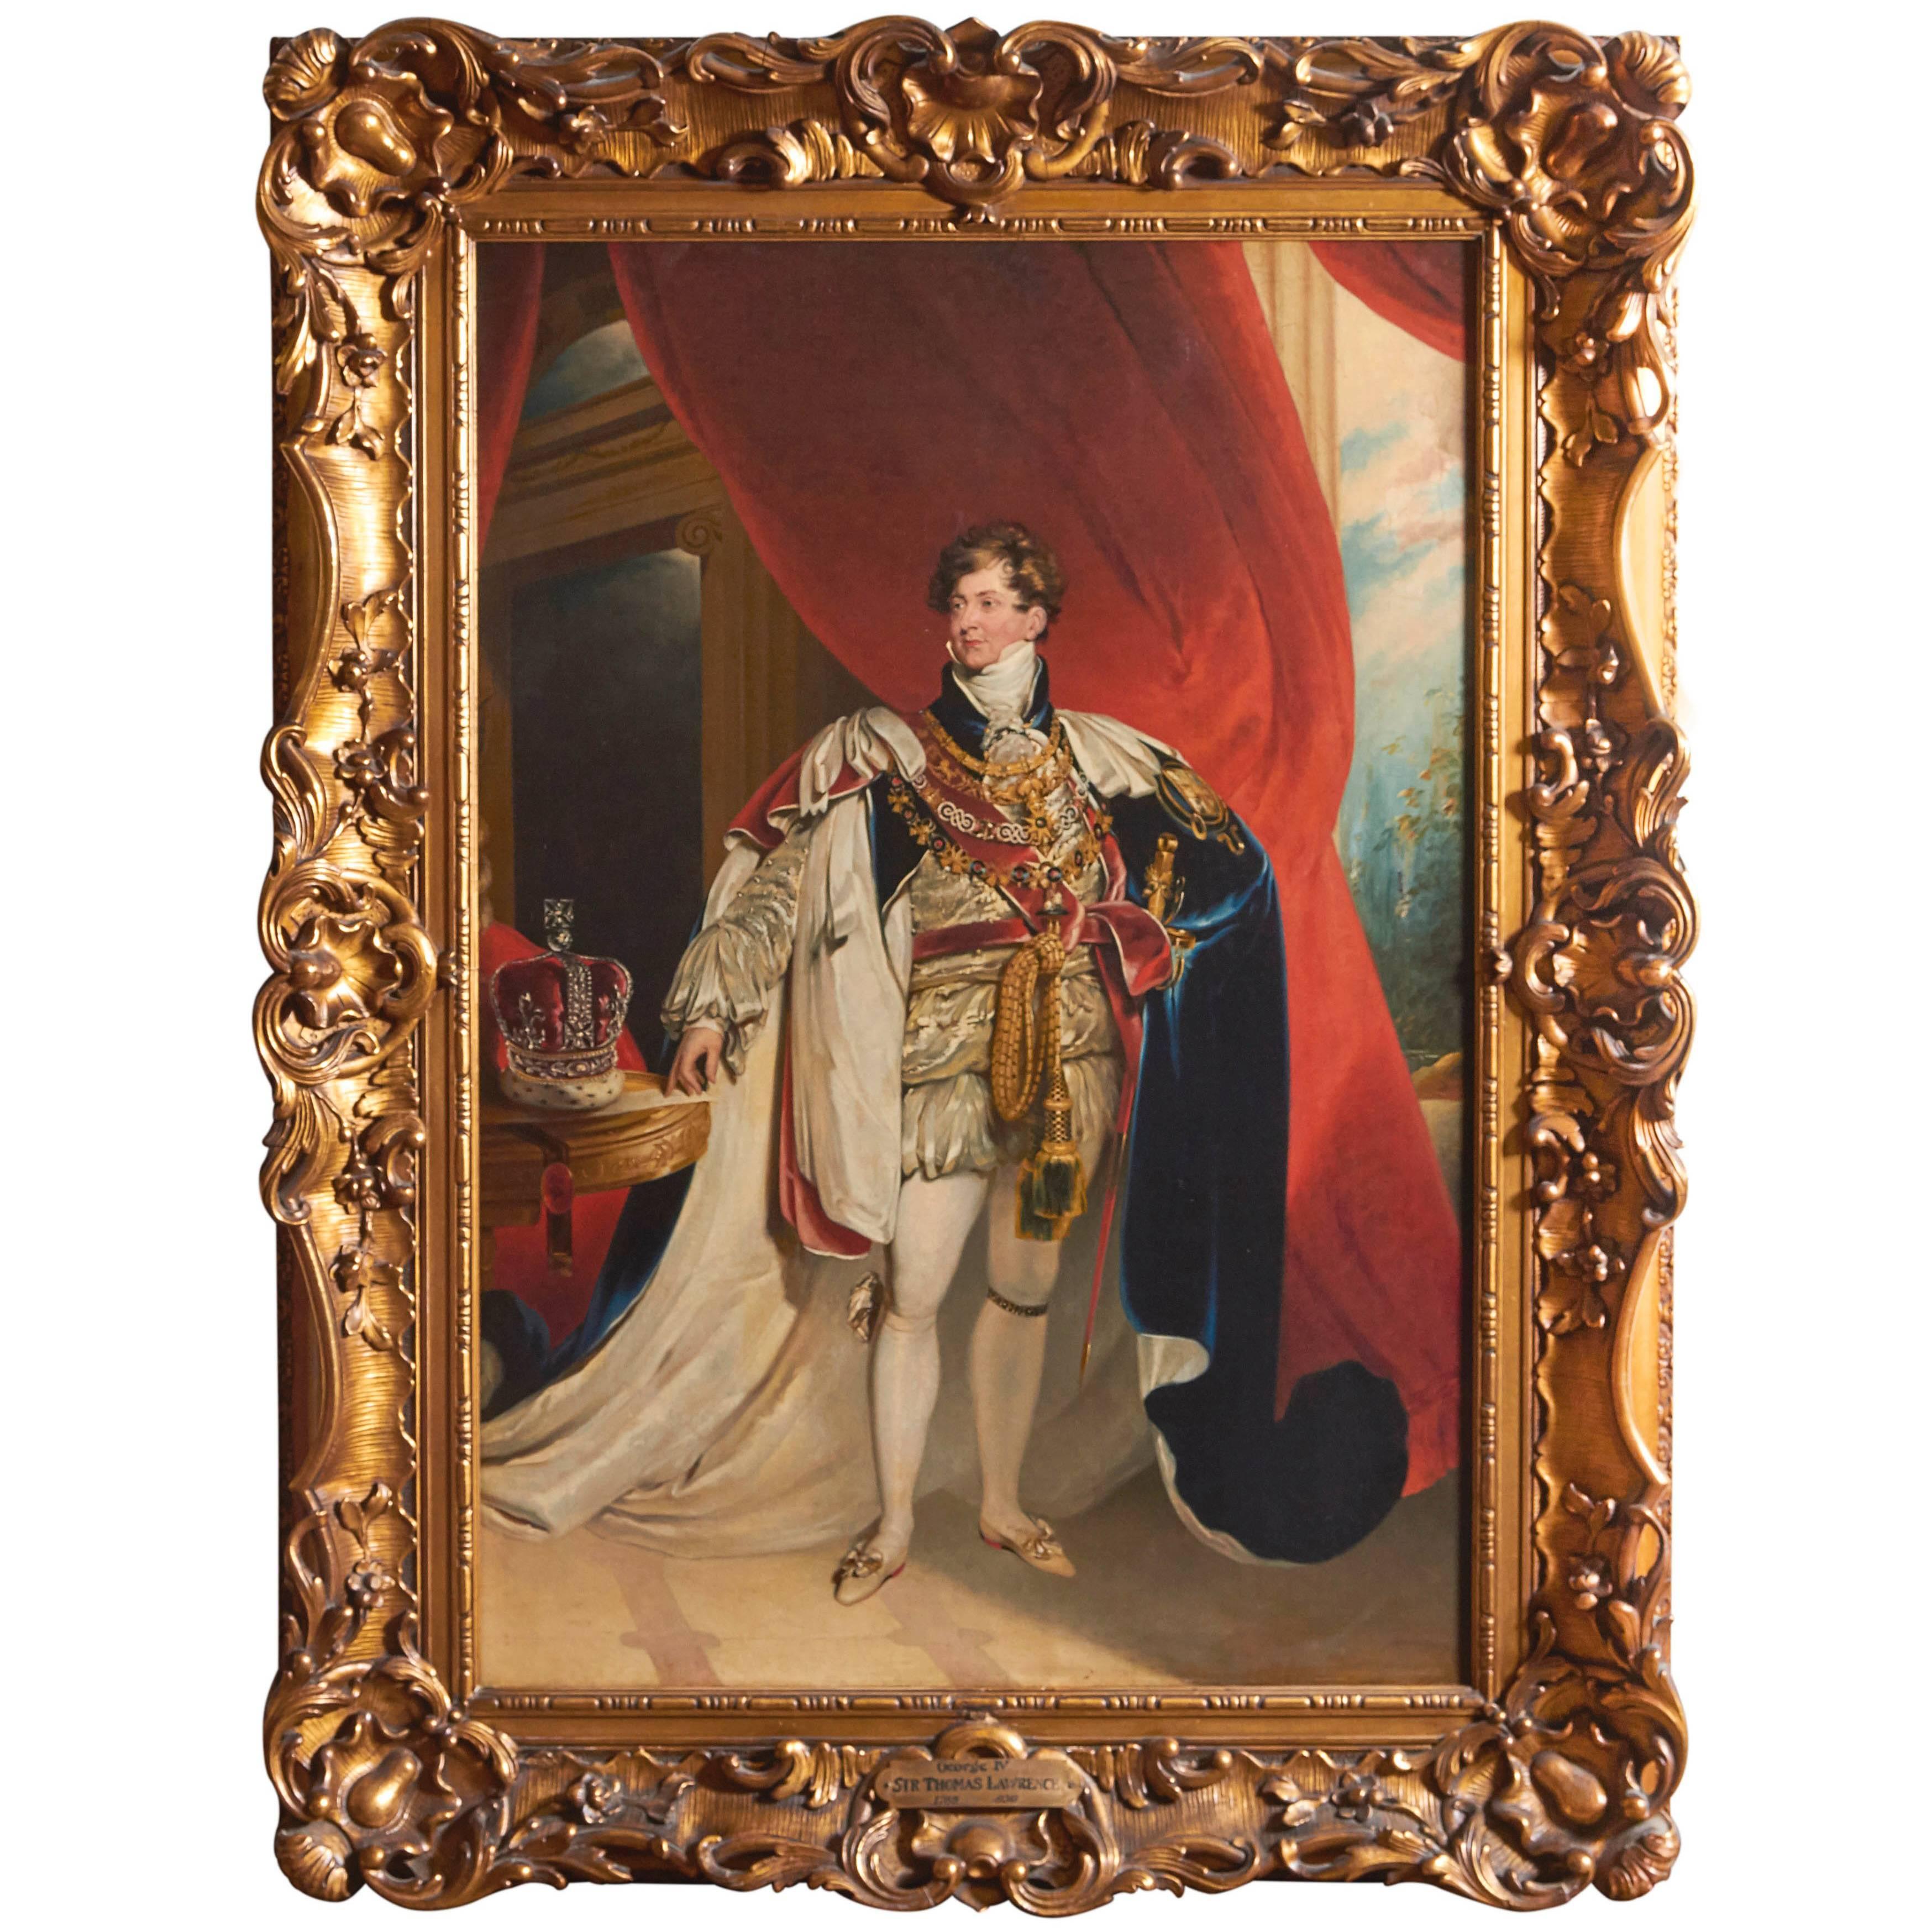 Copy of 'King George IV', Oil on Canvas